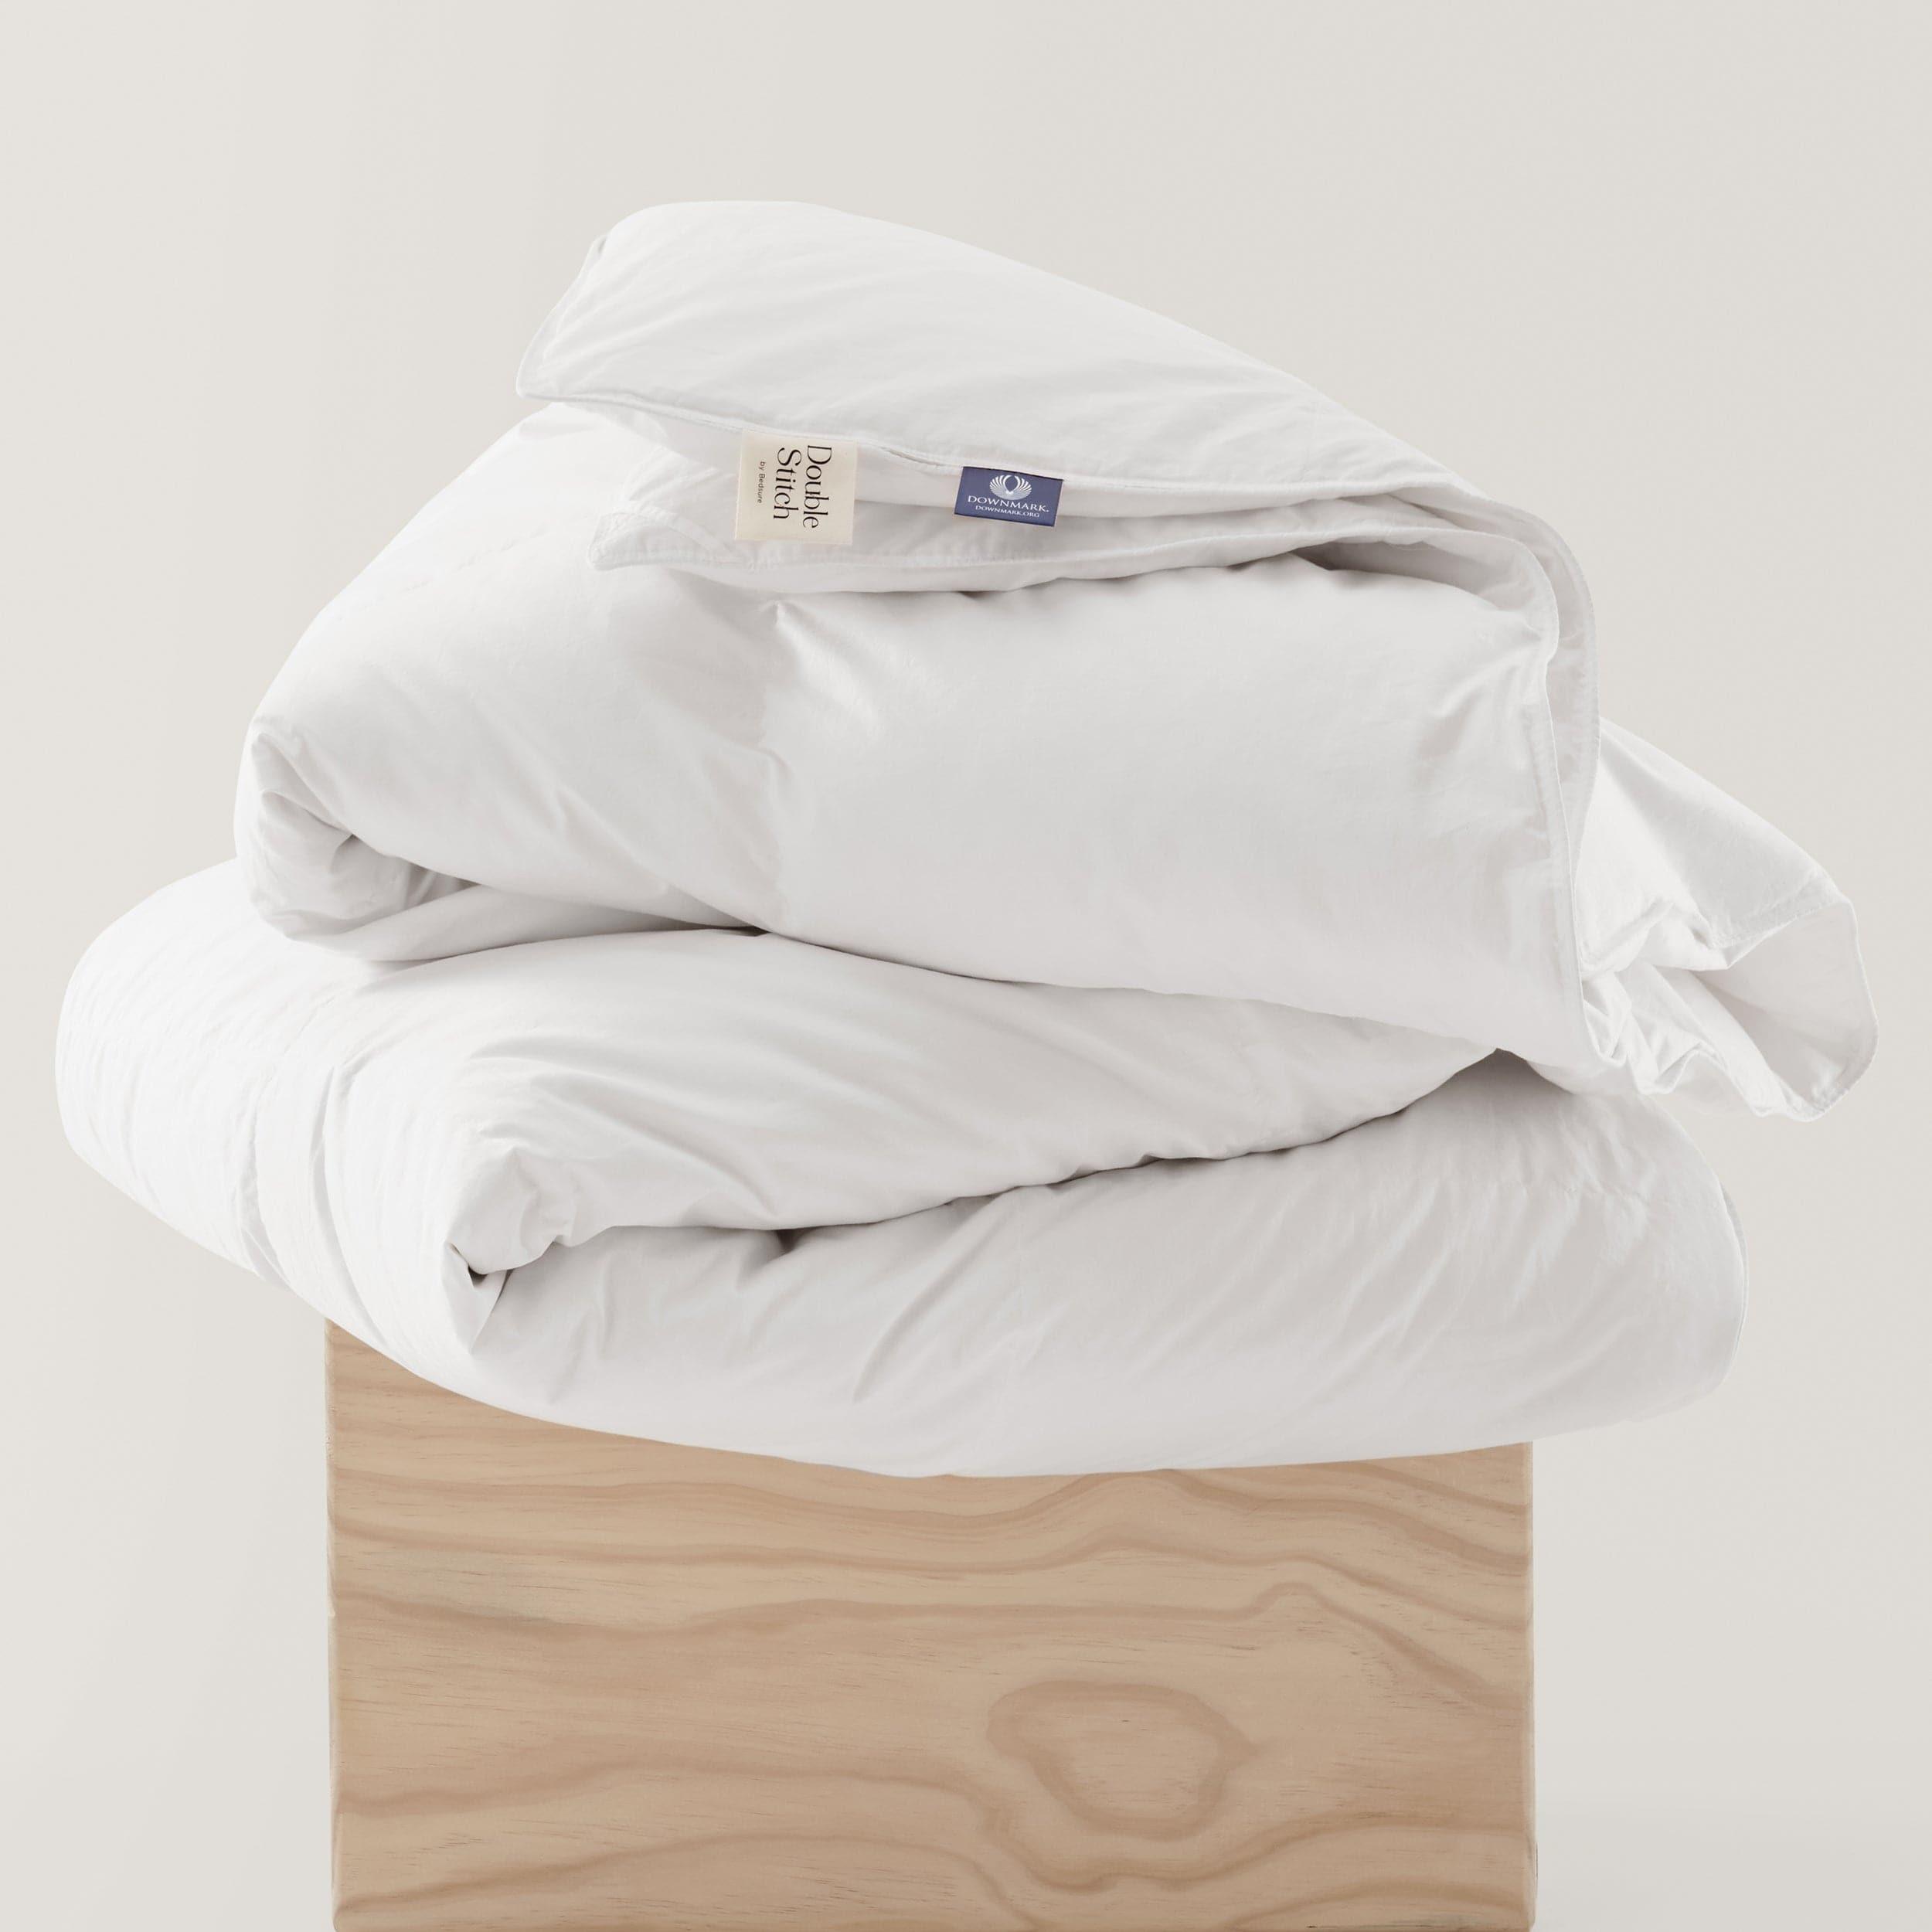 Stay cozy and warm all night long with our high-quality king duvet insert.